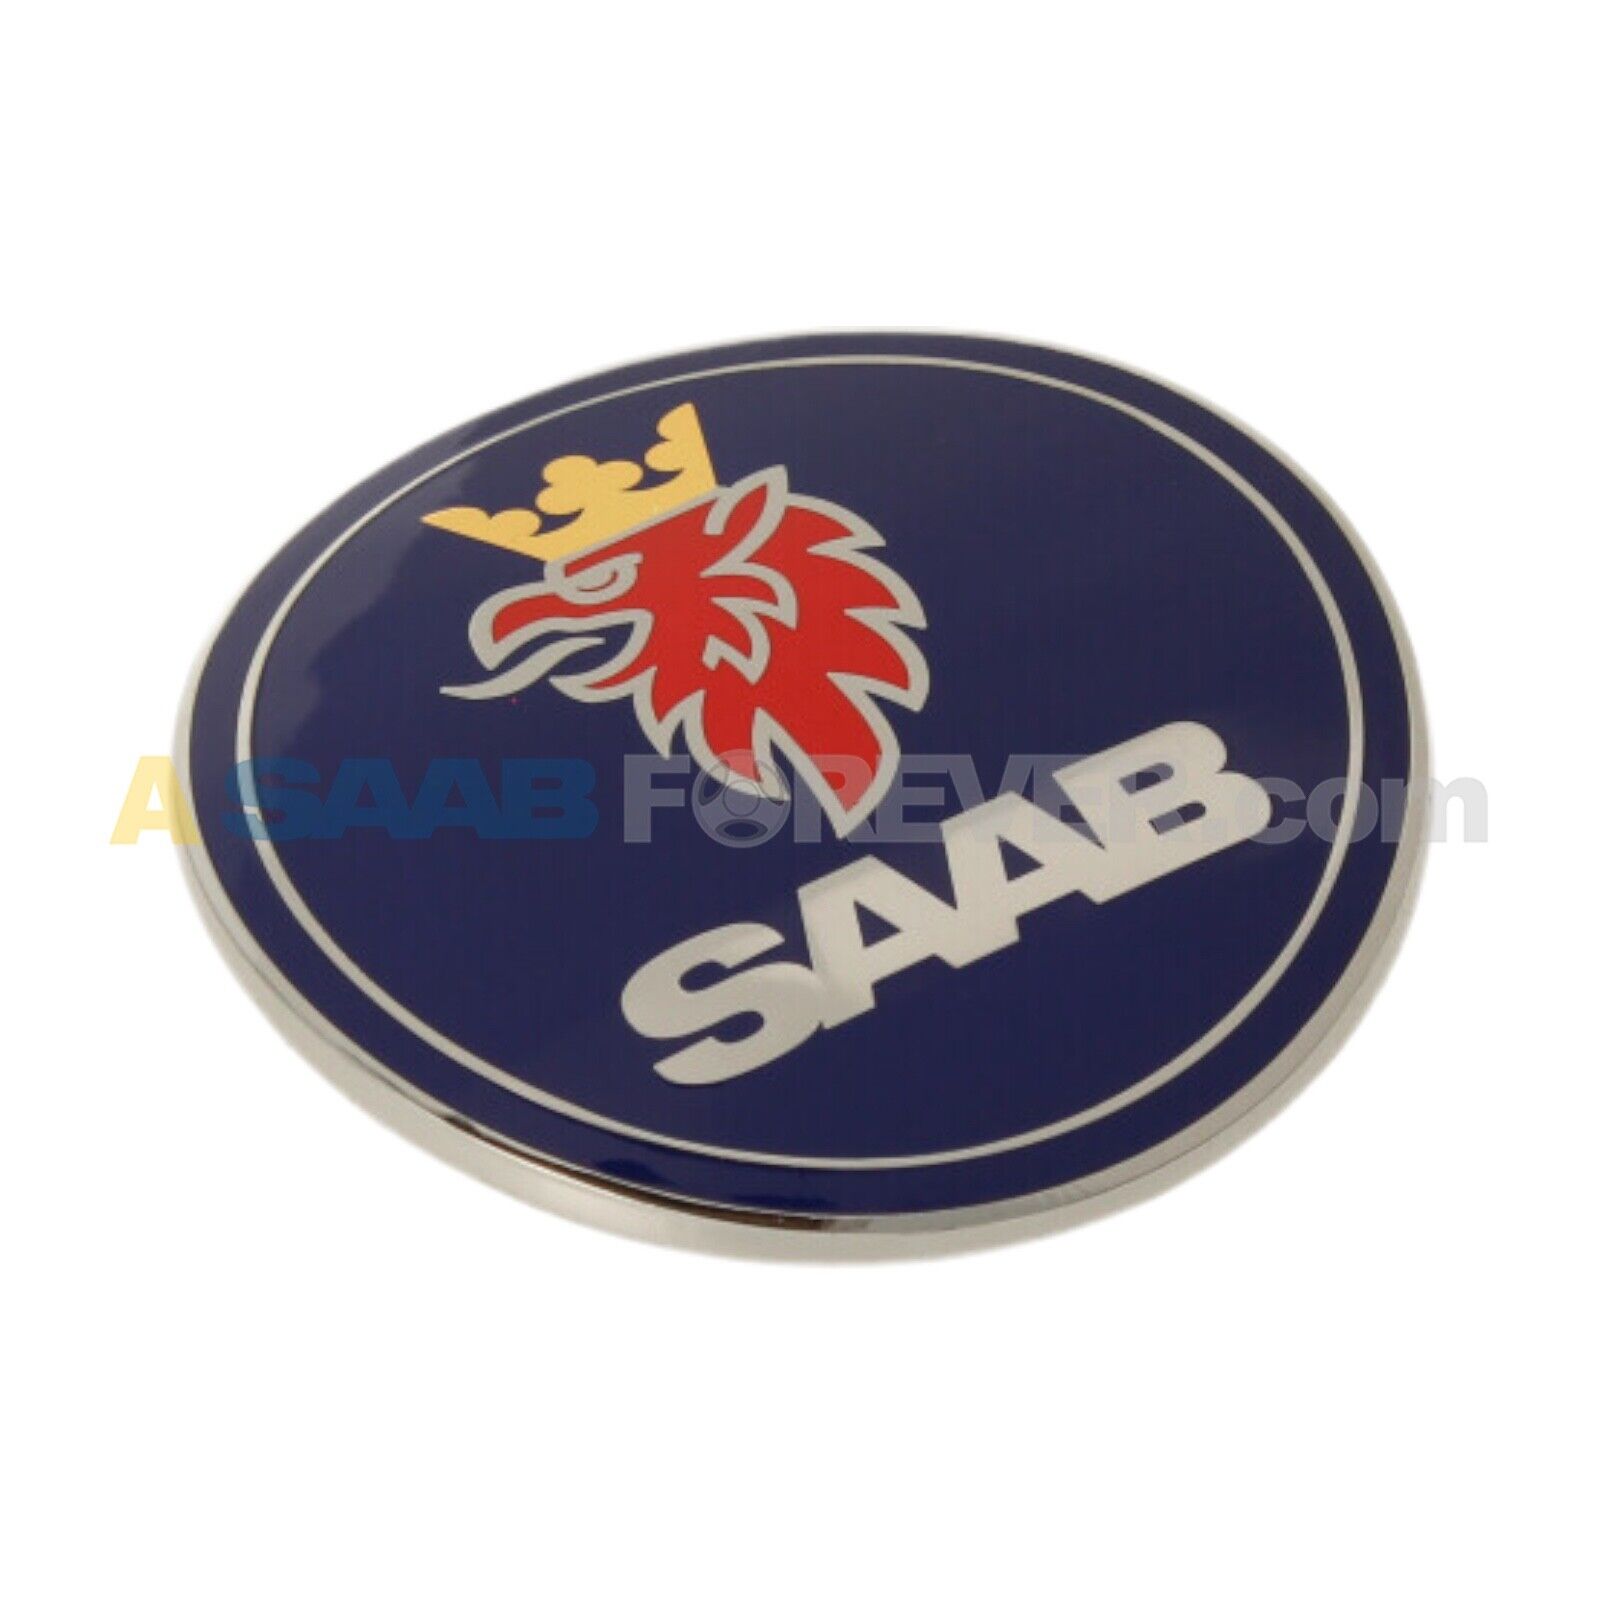 SAAB 9-3 REAR EMBLEM BADGE CONVERTIBLE ONLY NEW GENUINE OEM REPRODUCTION 5289897